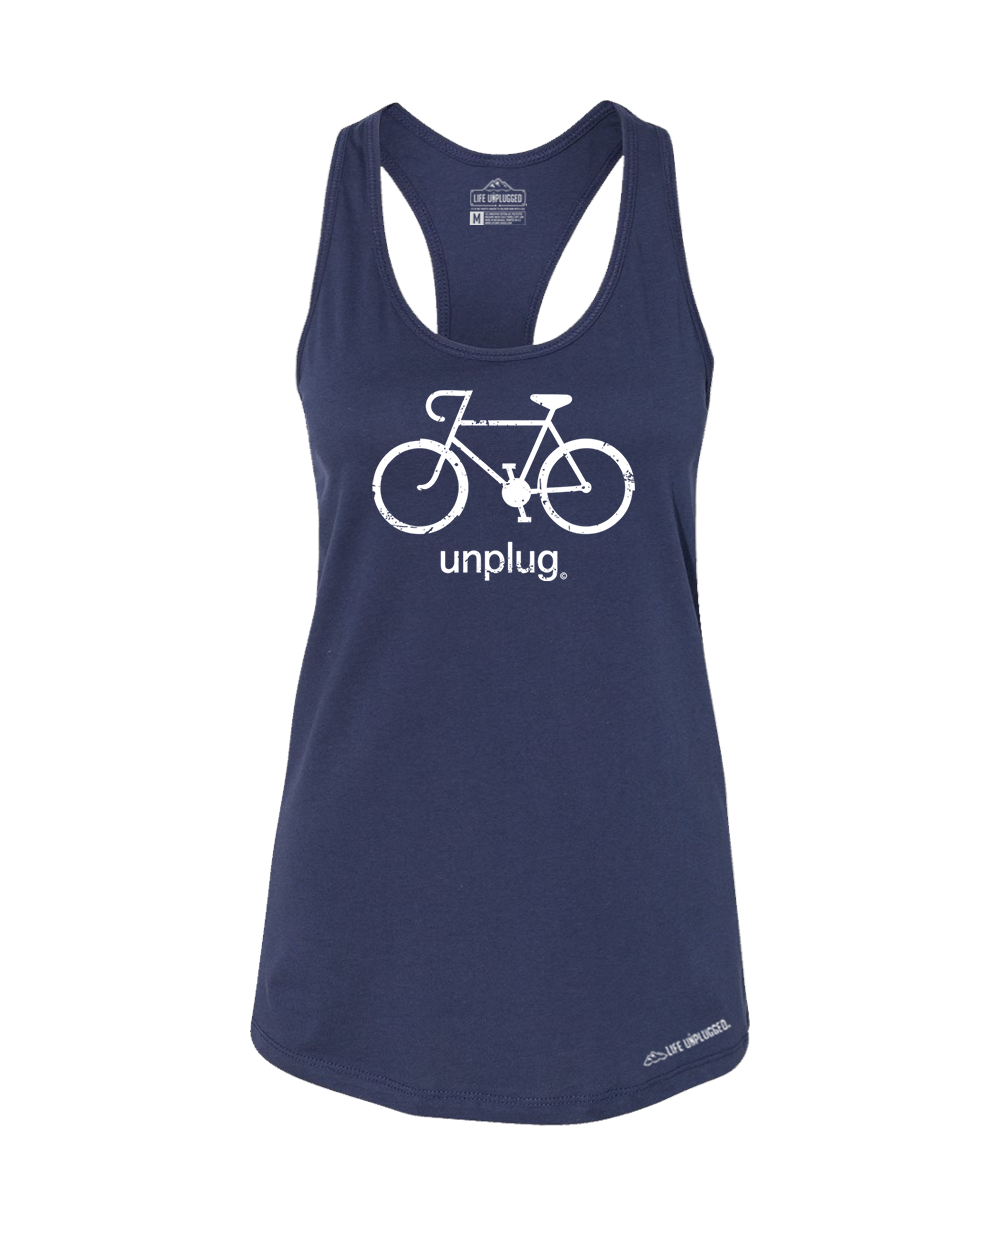 Road Bike Premium Women's Relaxed Fit Racerback Tank Top - Life Unplugged